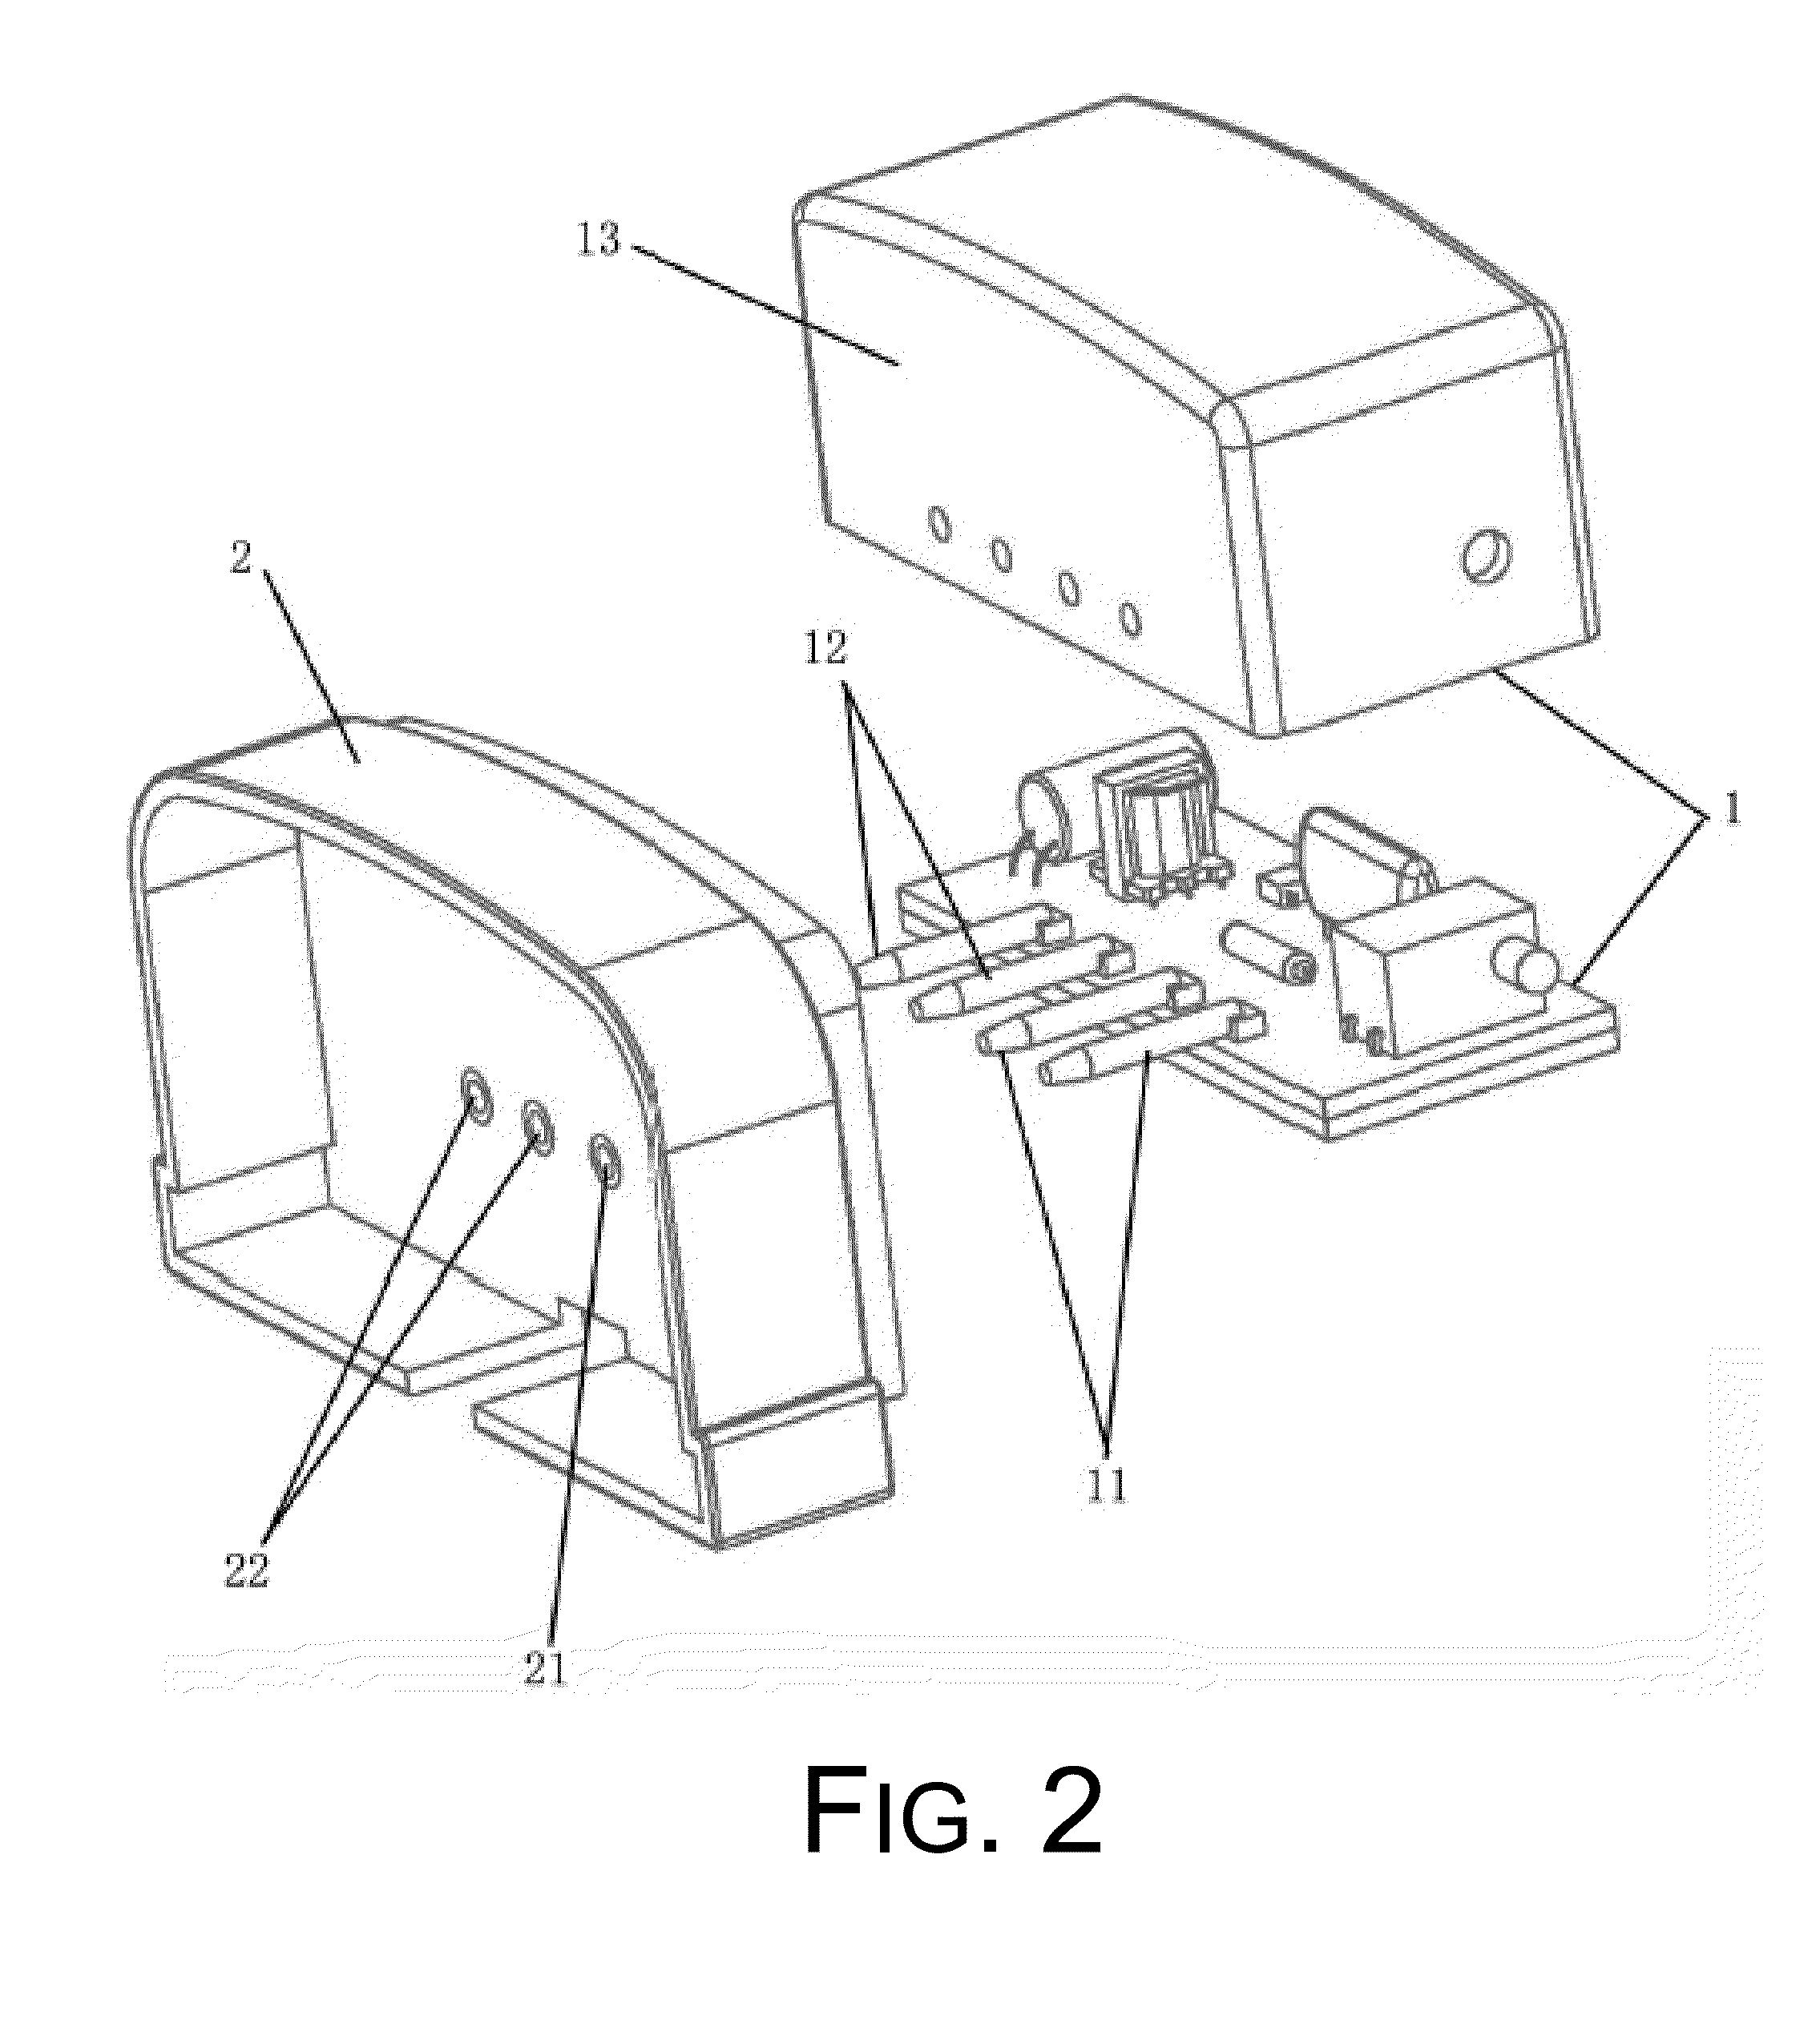 Pluggable Control Module For LED Lighting Device